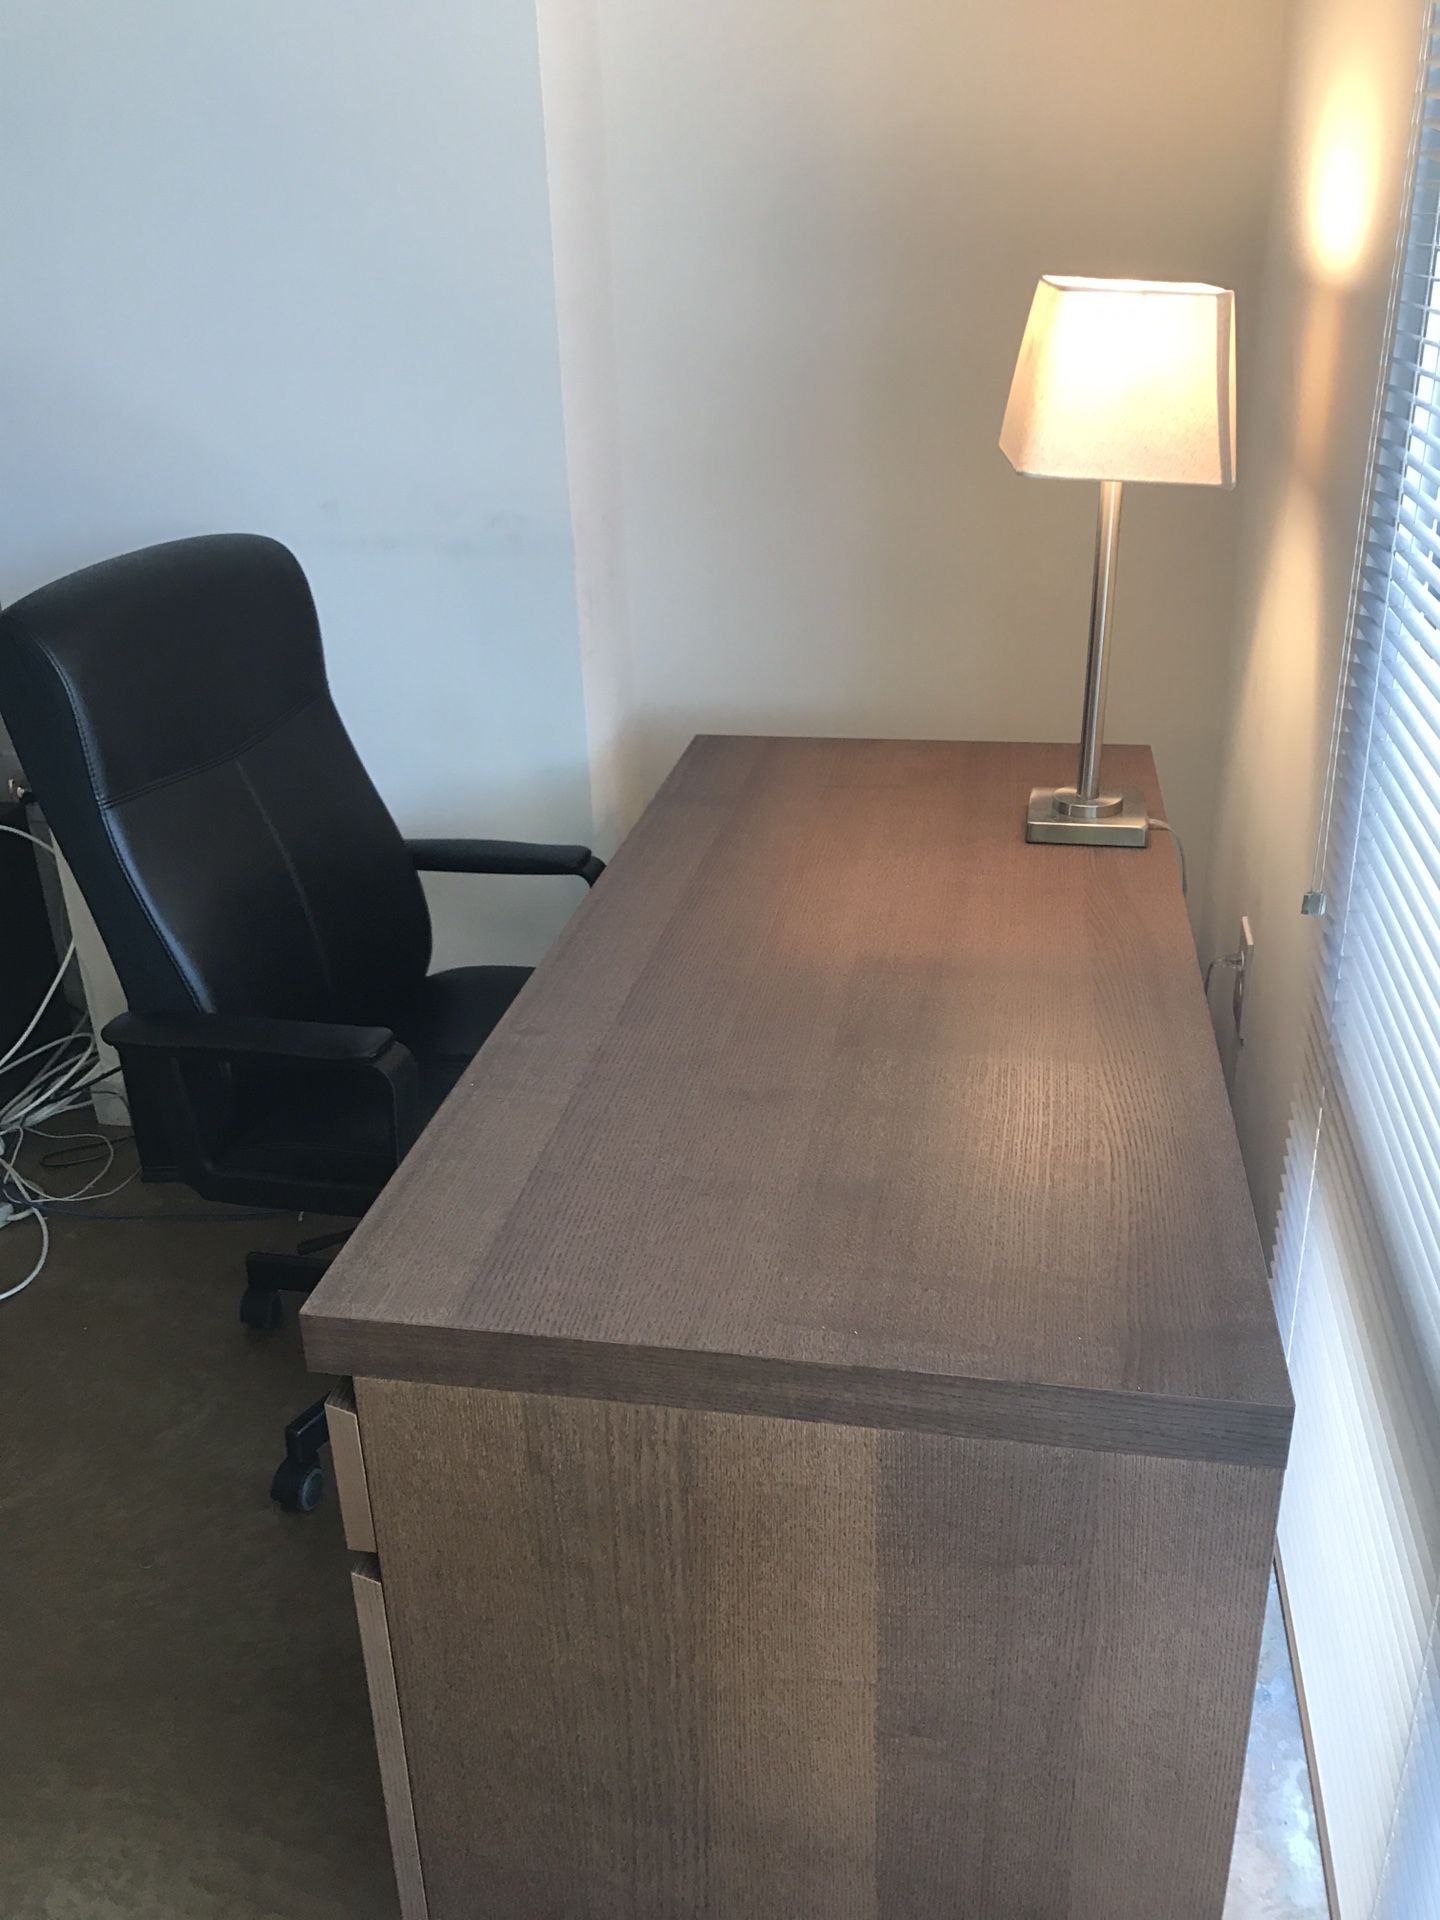 Large Desk and Computer Chair